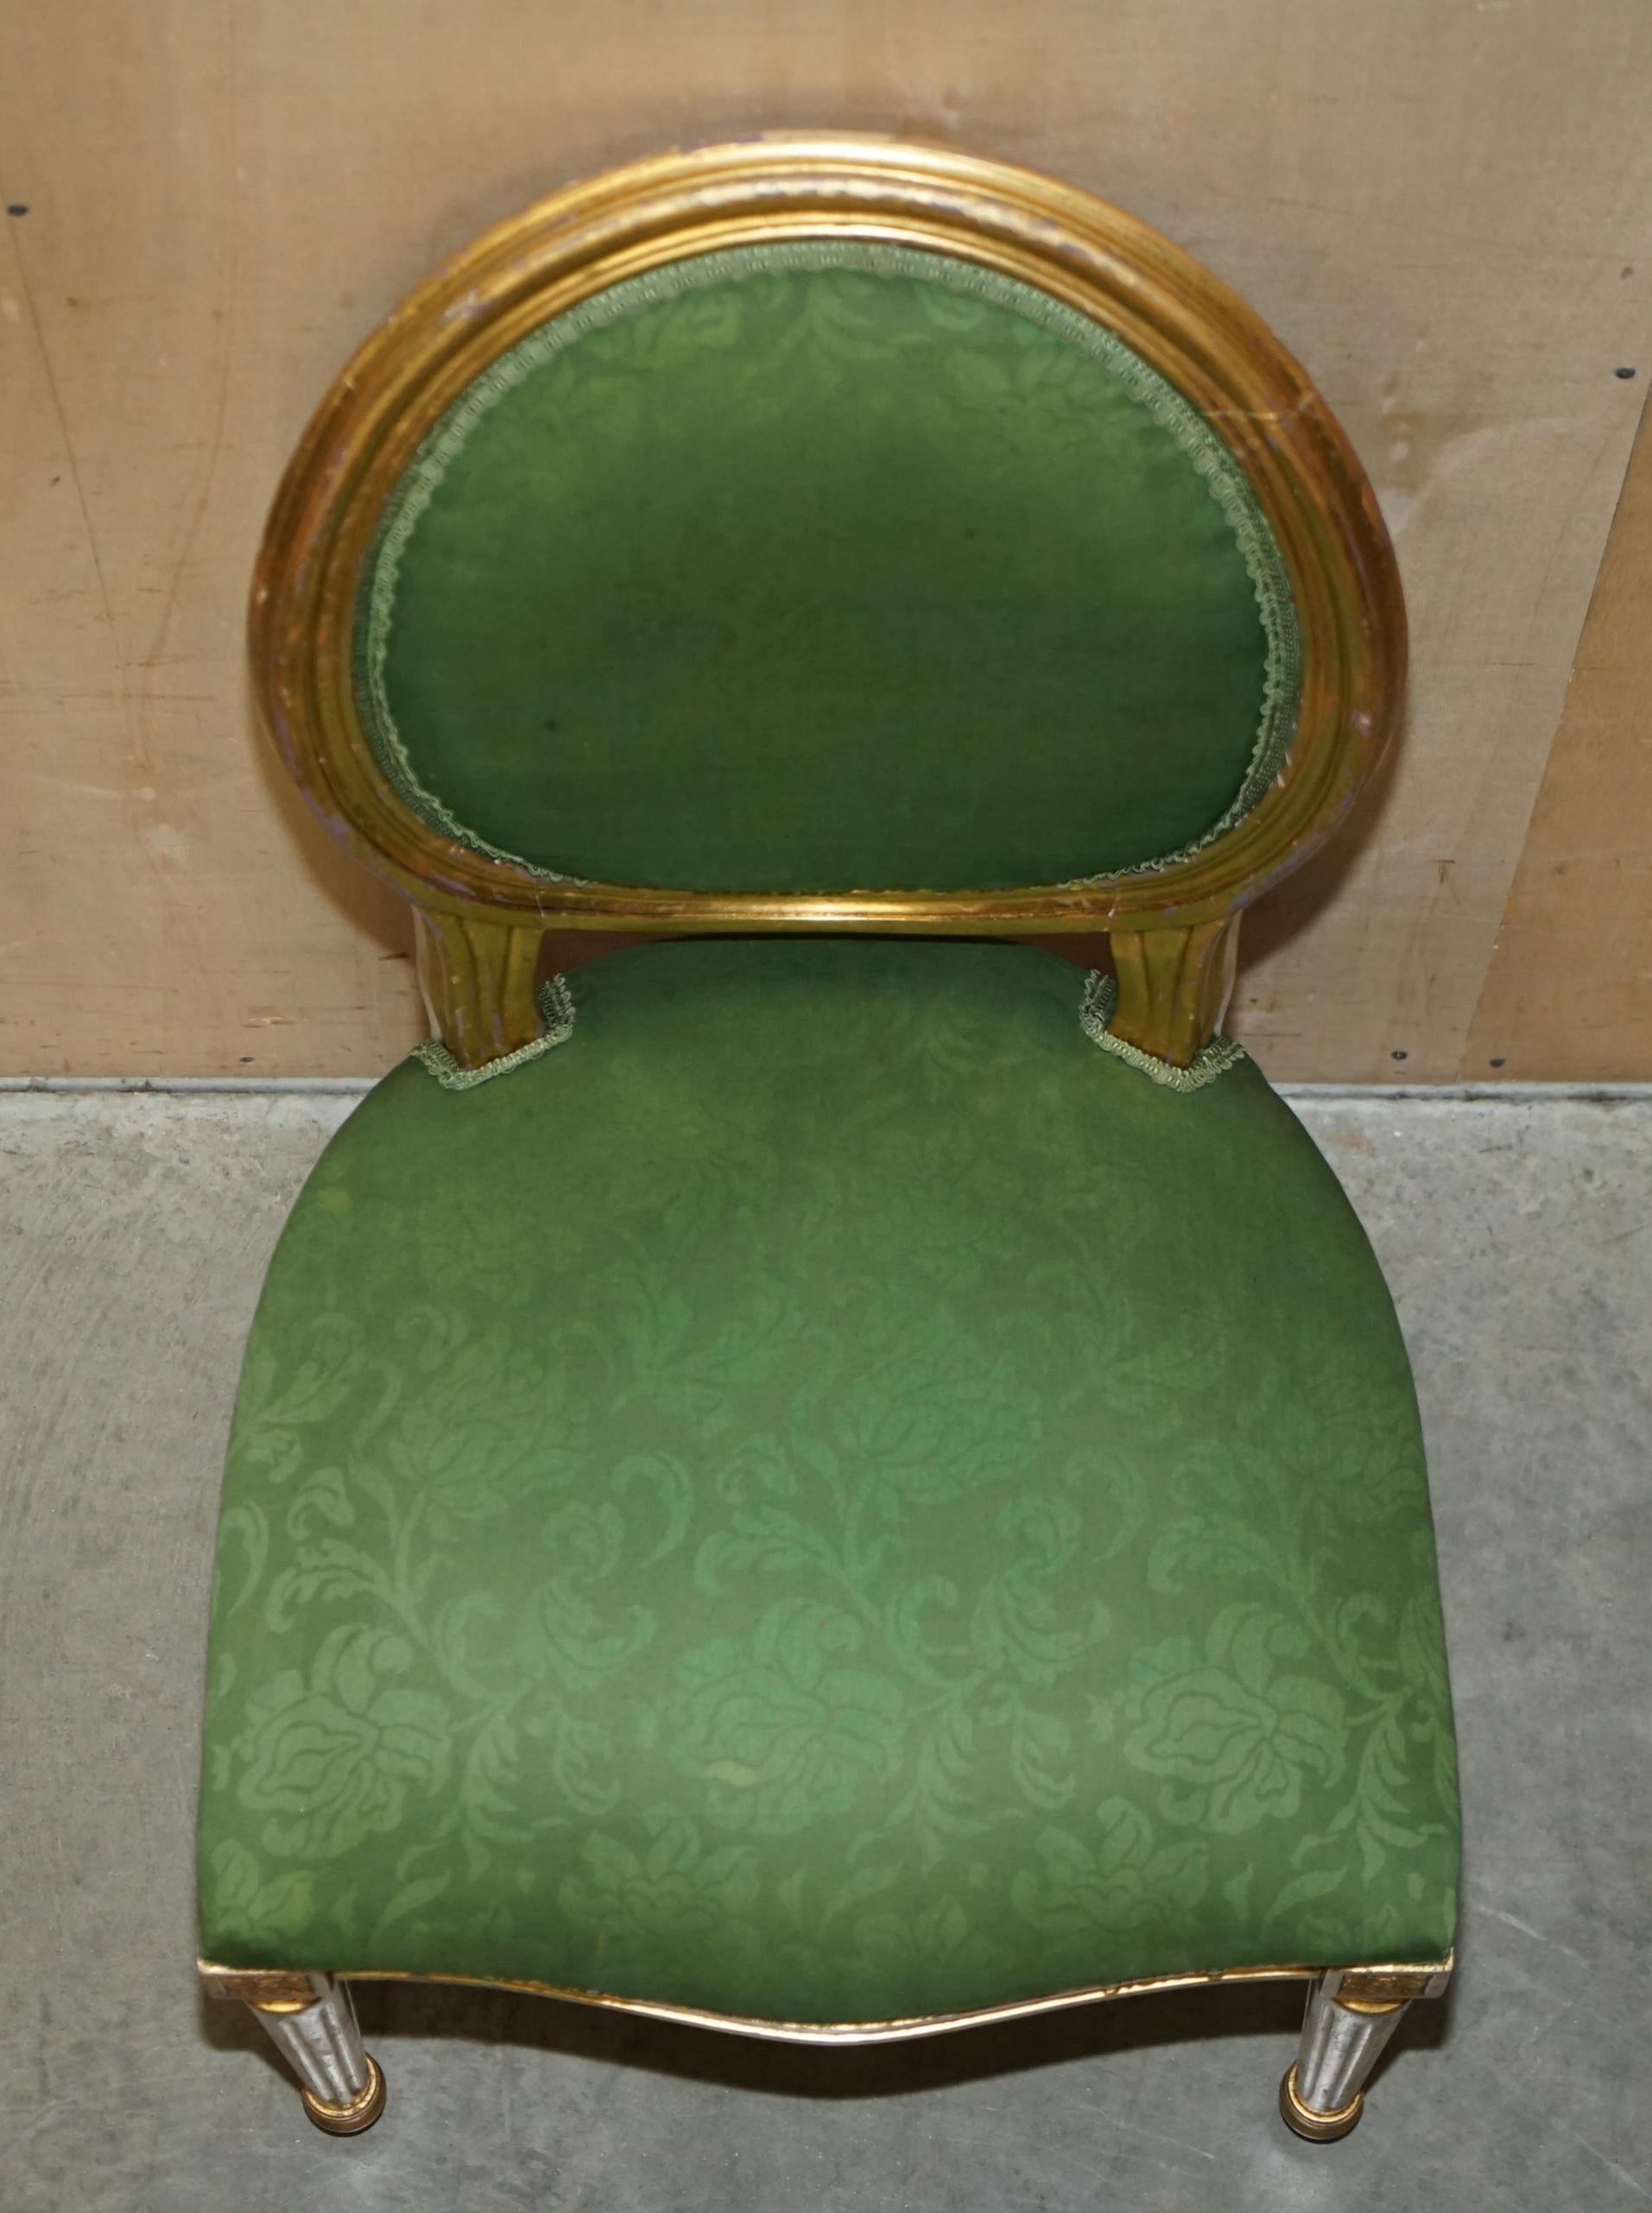 EiGHT ANTIQUE LOUIS XVI  Style DINING CHAIRS FROM LADY DIANA'S SPENCER HOUSE 8 im Angebot 11